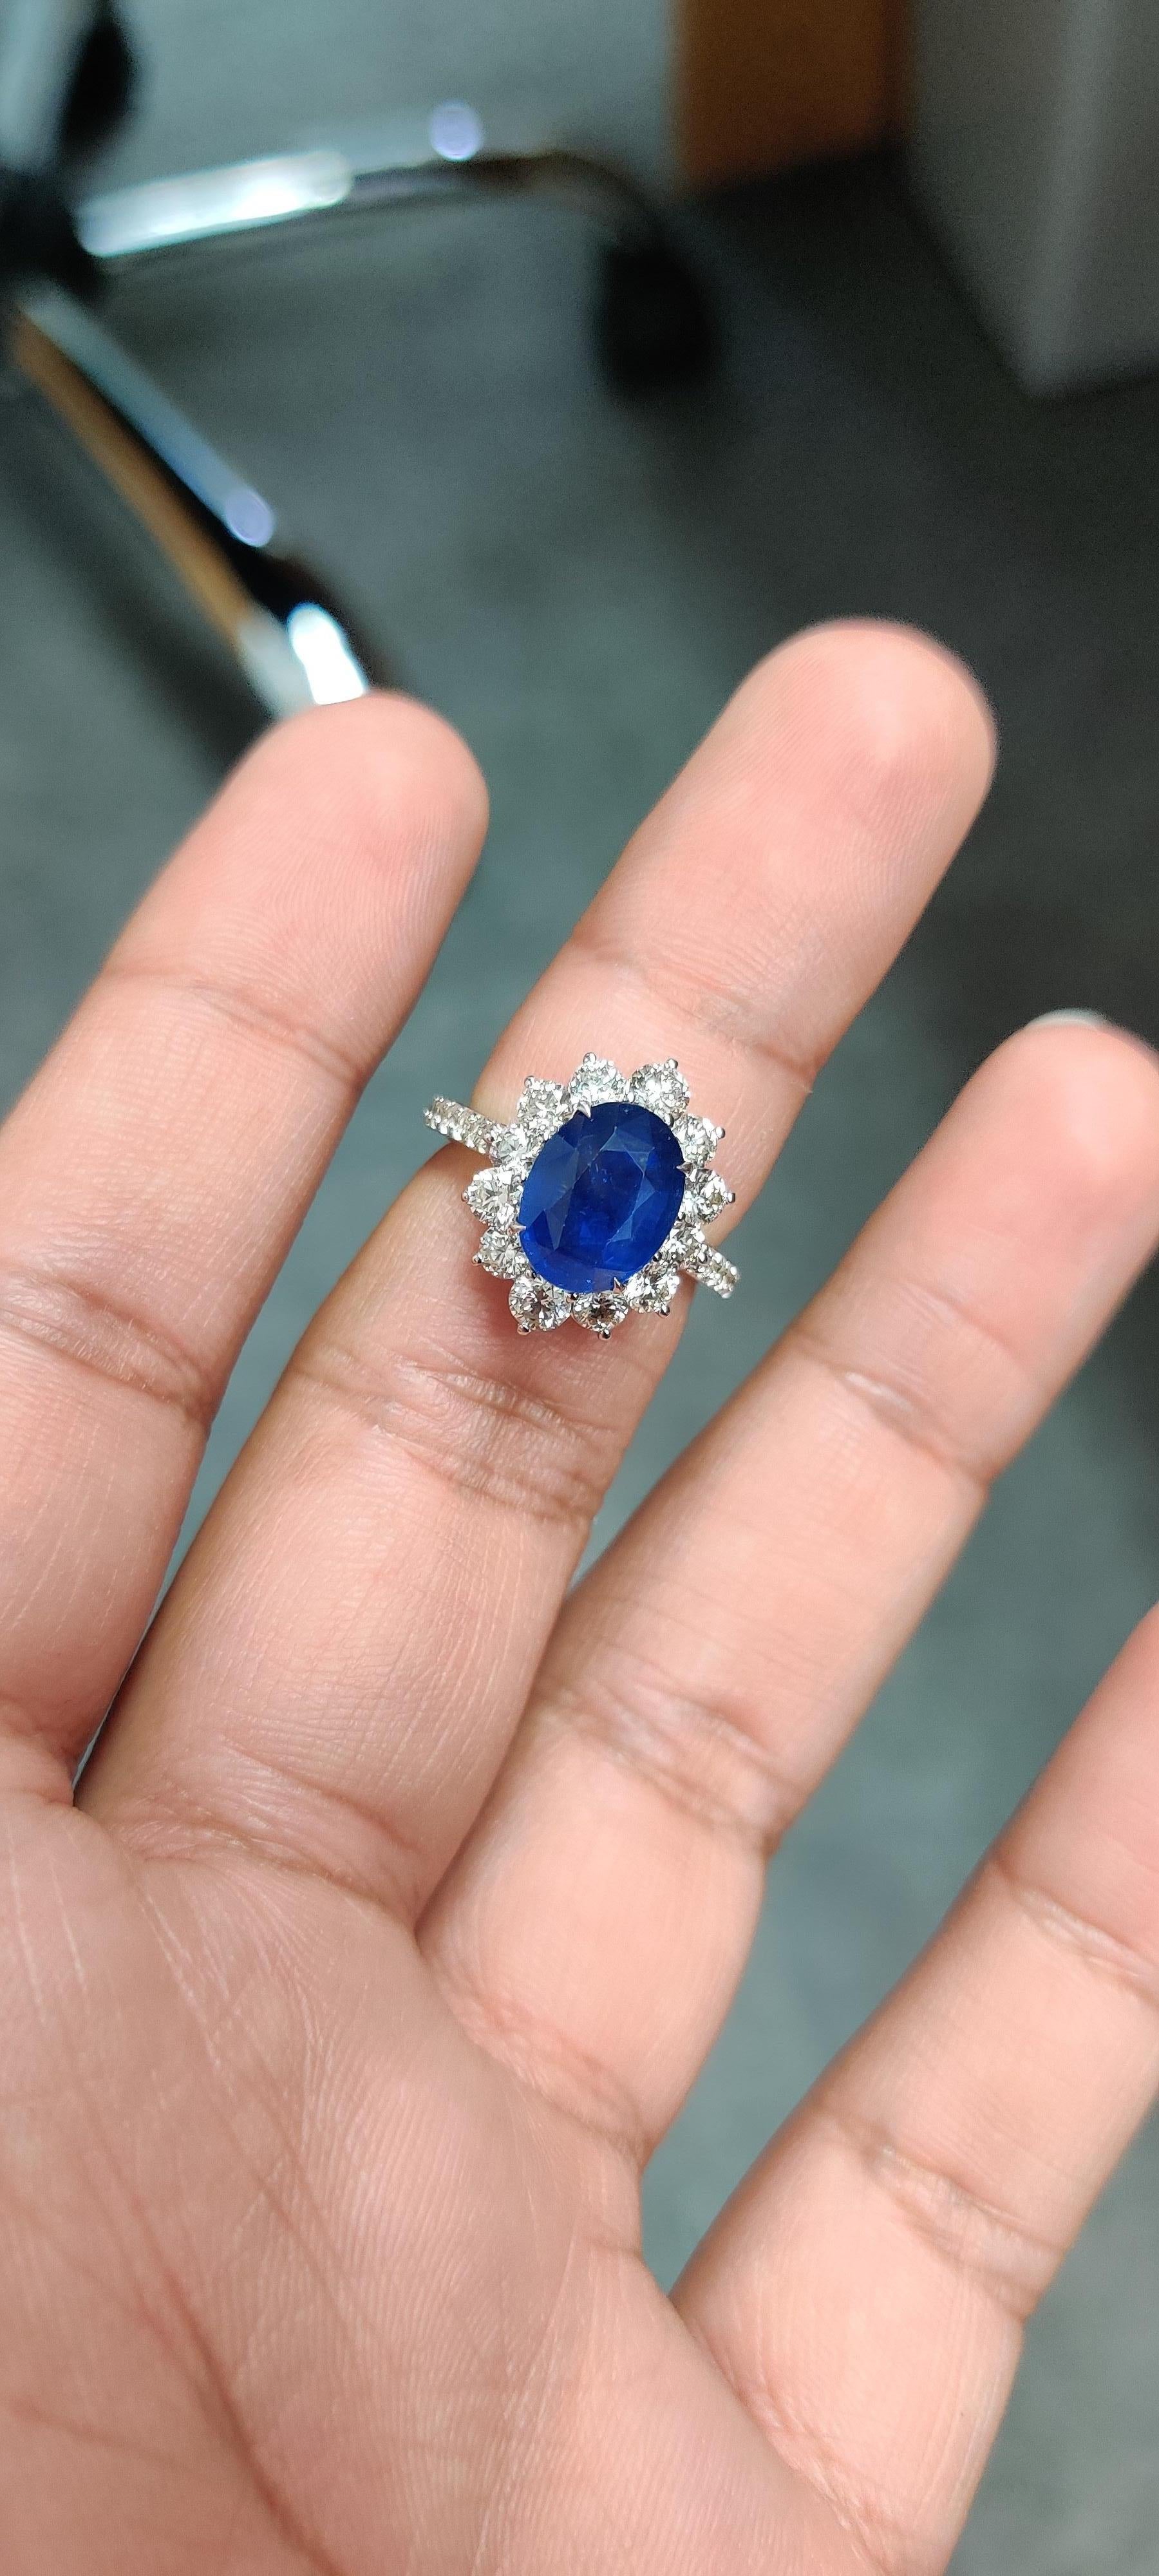 Introducing our stunning 18K Gold Oval Sapphire Ring, a true symbol of luxury and elegance. This exquisite piece features a captivating 4.19 carat oval sapphire, sourced from Sri Lanka, boasting a deep royal blue hue that commands attention and